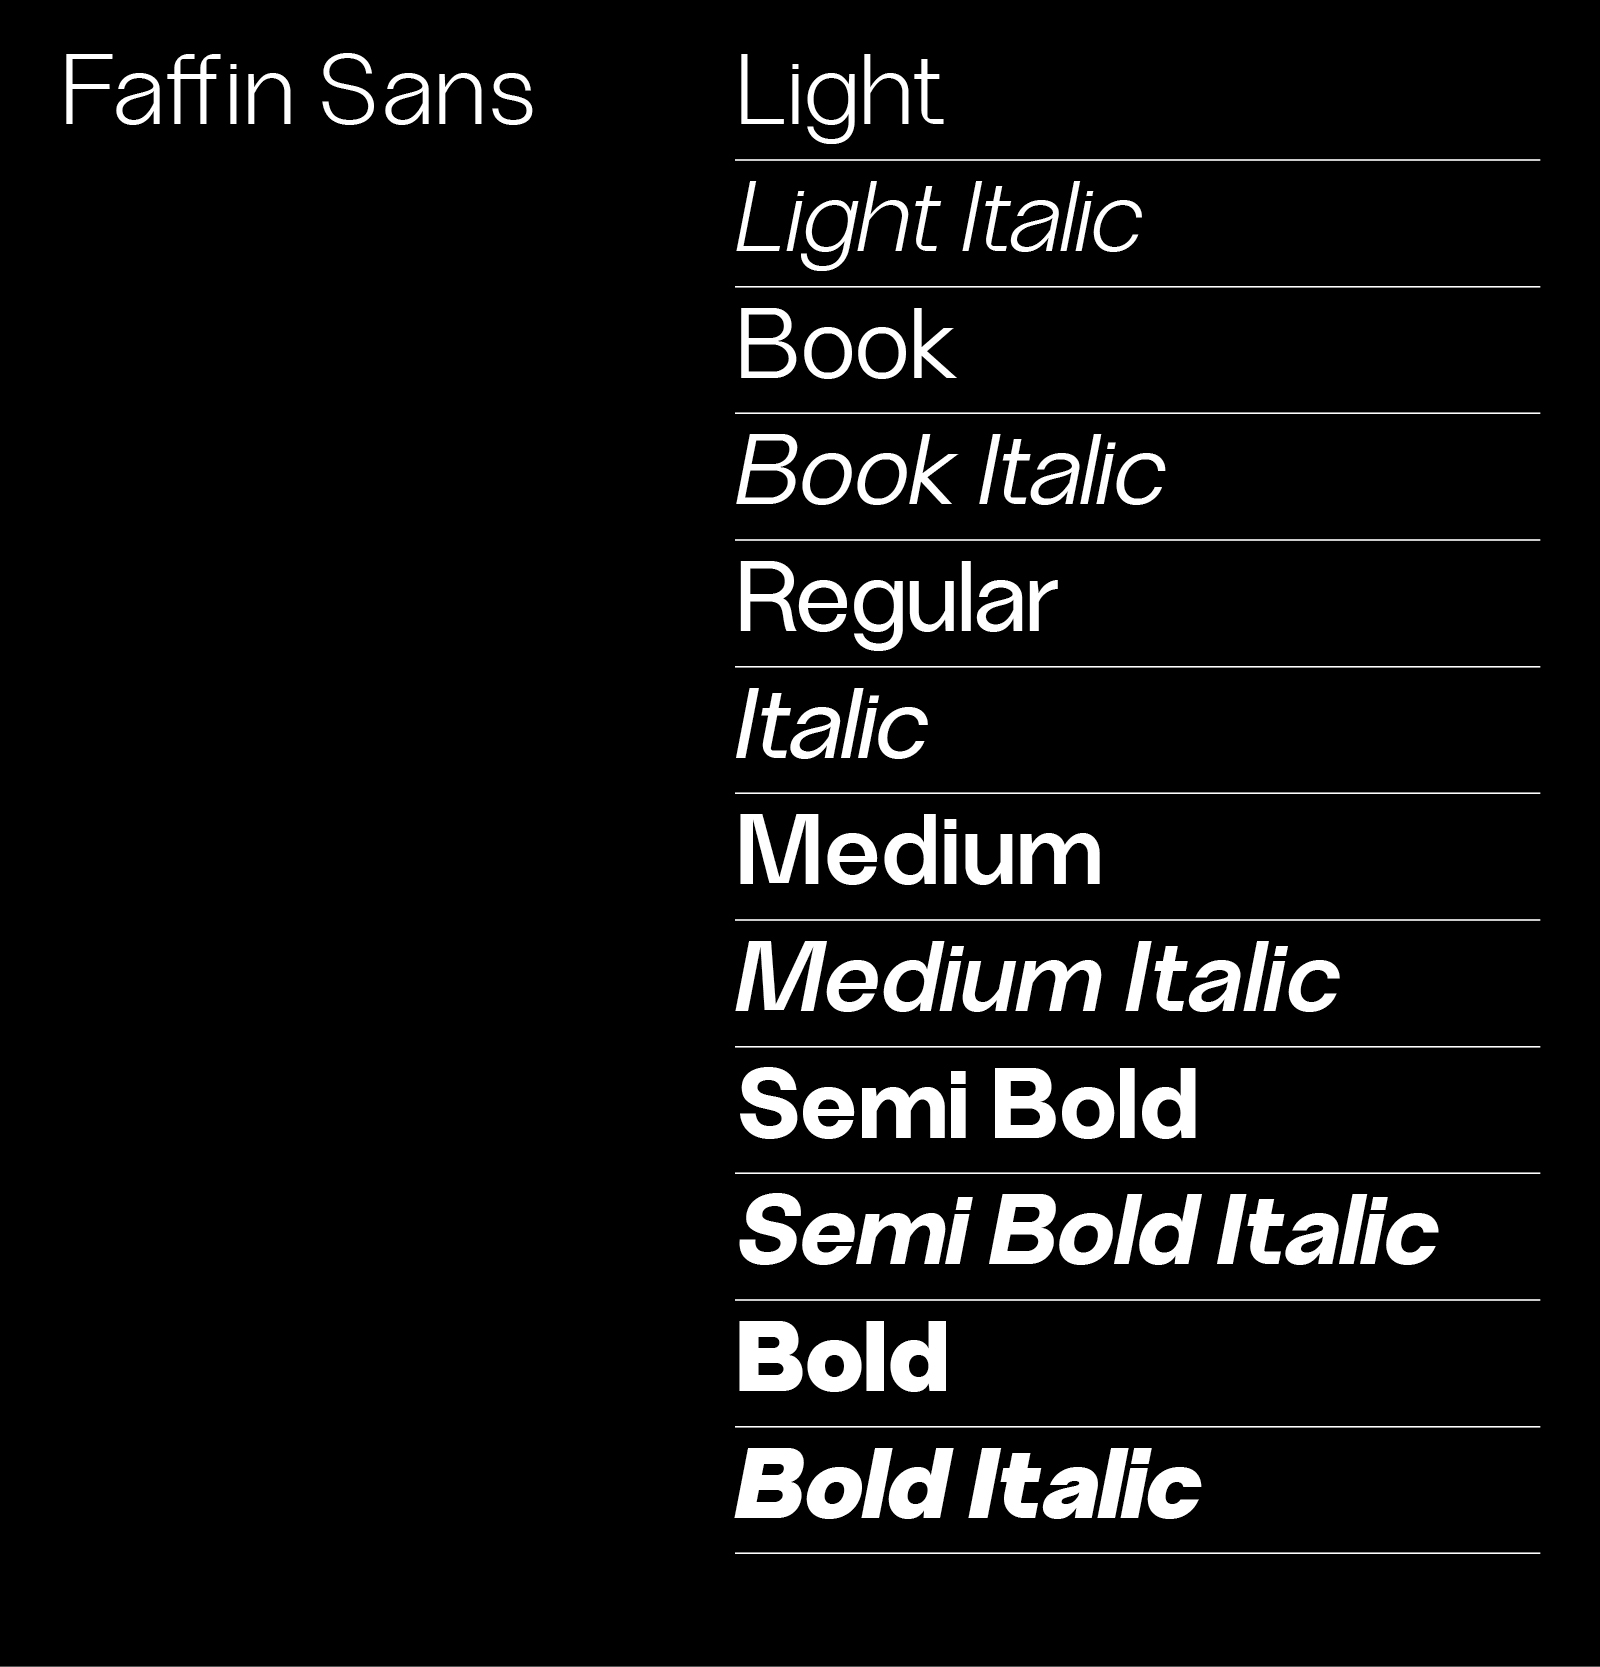 Faffin font weights